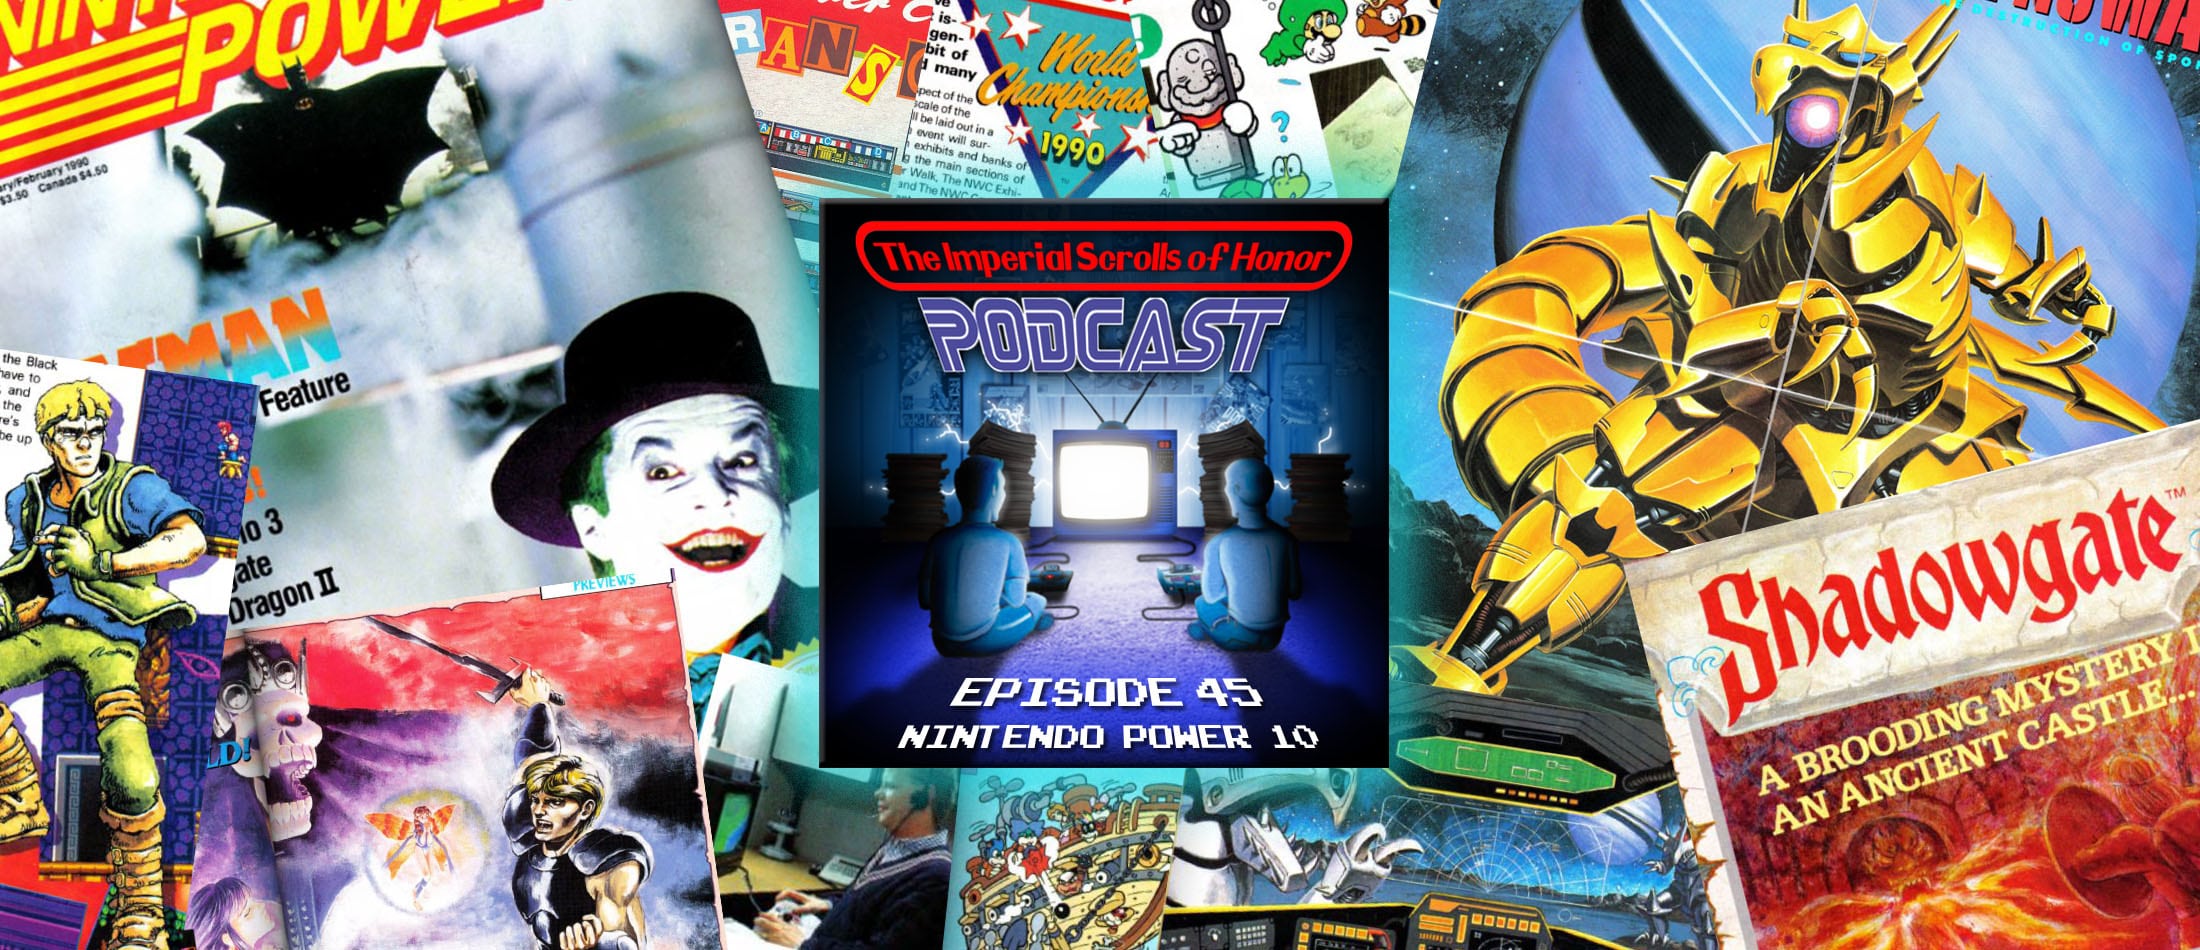 The Imperial Scrolls of Honor Podcast - Ep 45 - Nintendo Power #10